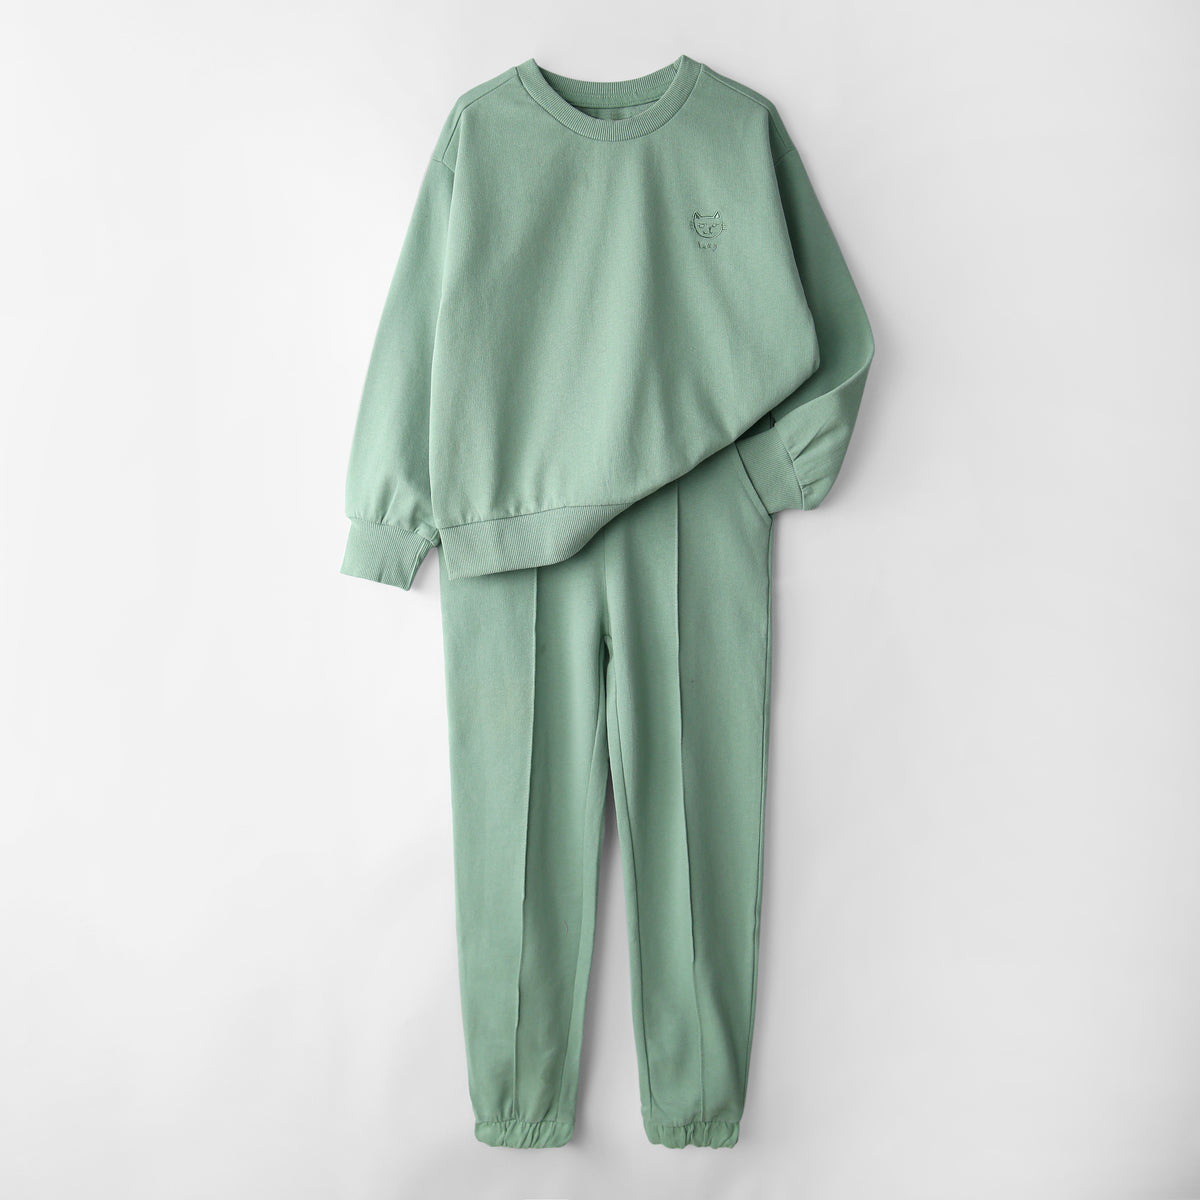 Premium Quality Soft Cotton Embroidered Light Green TrackSuit For Girls